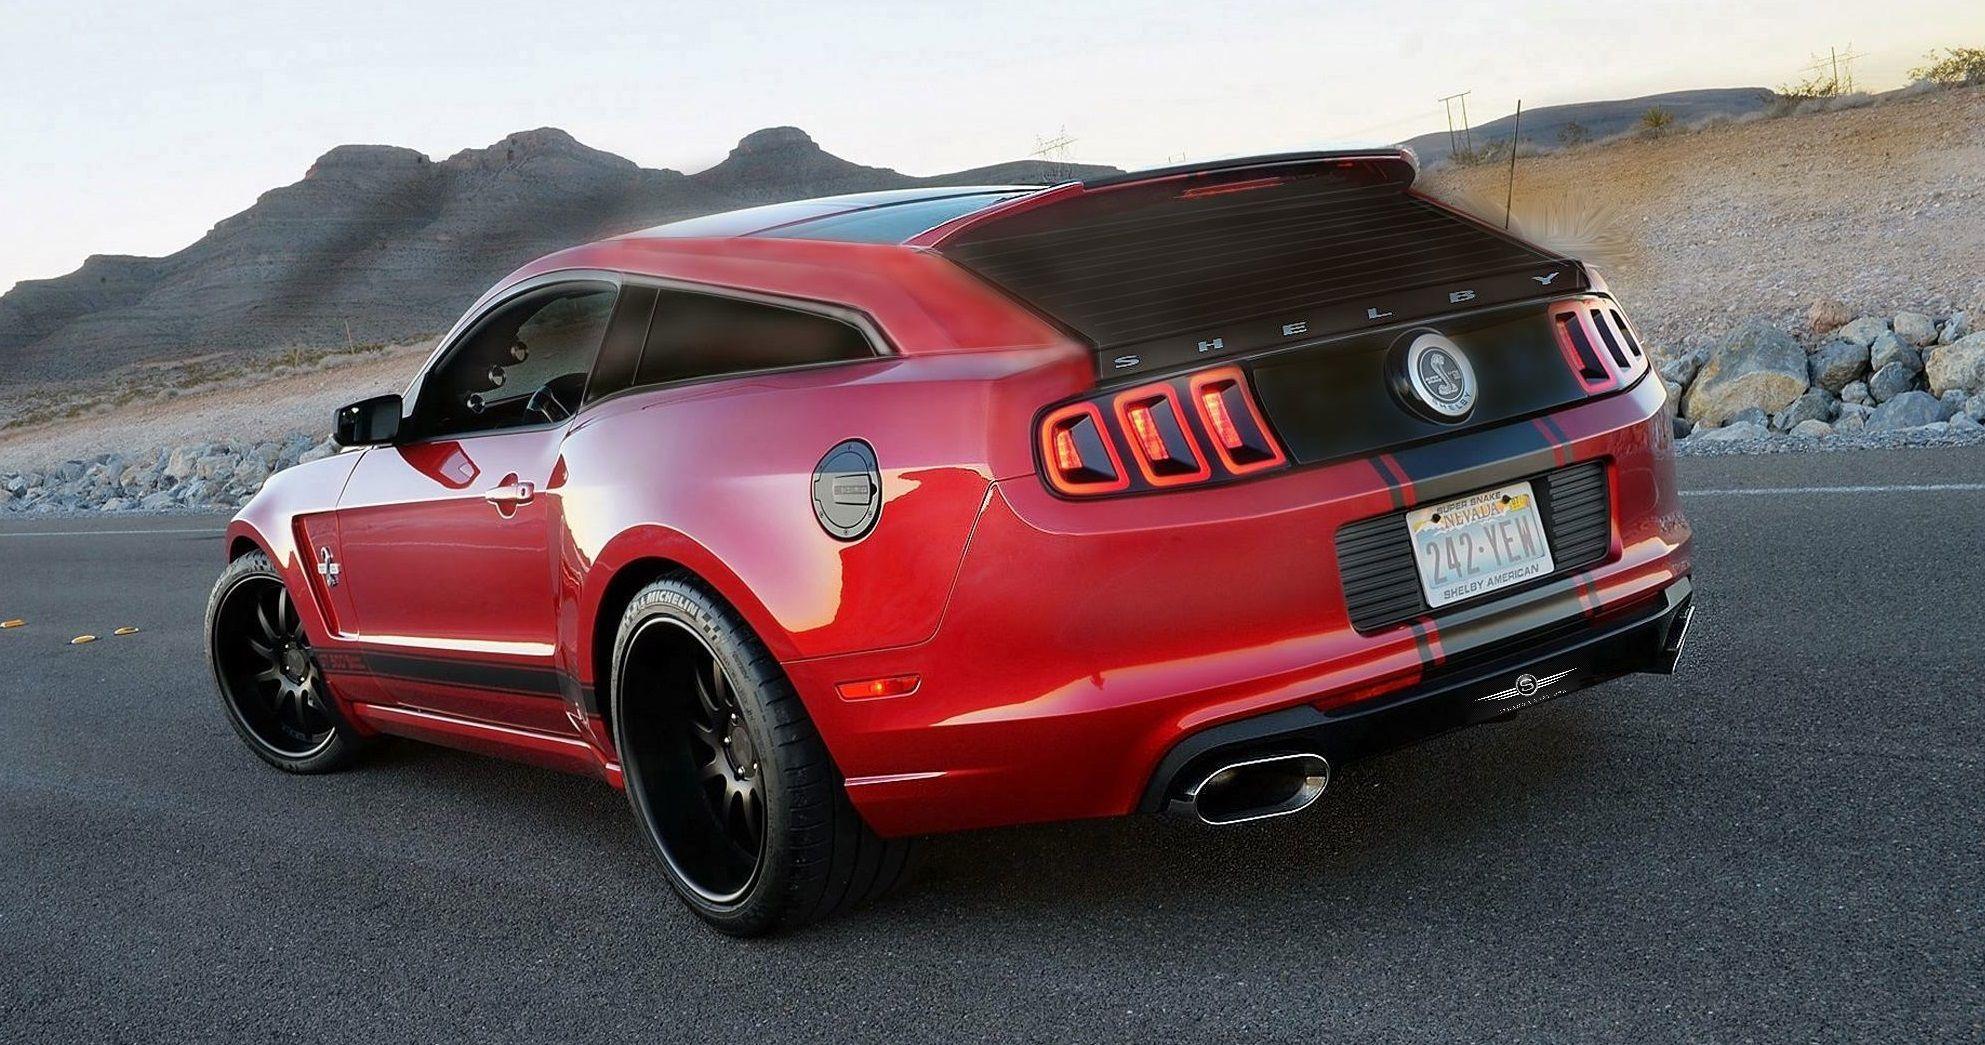 image about 2016 Ford Mustang Mustang